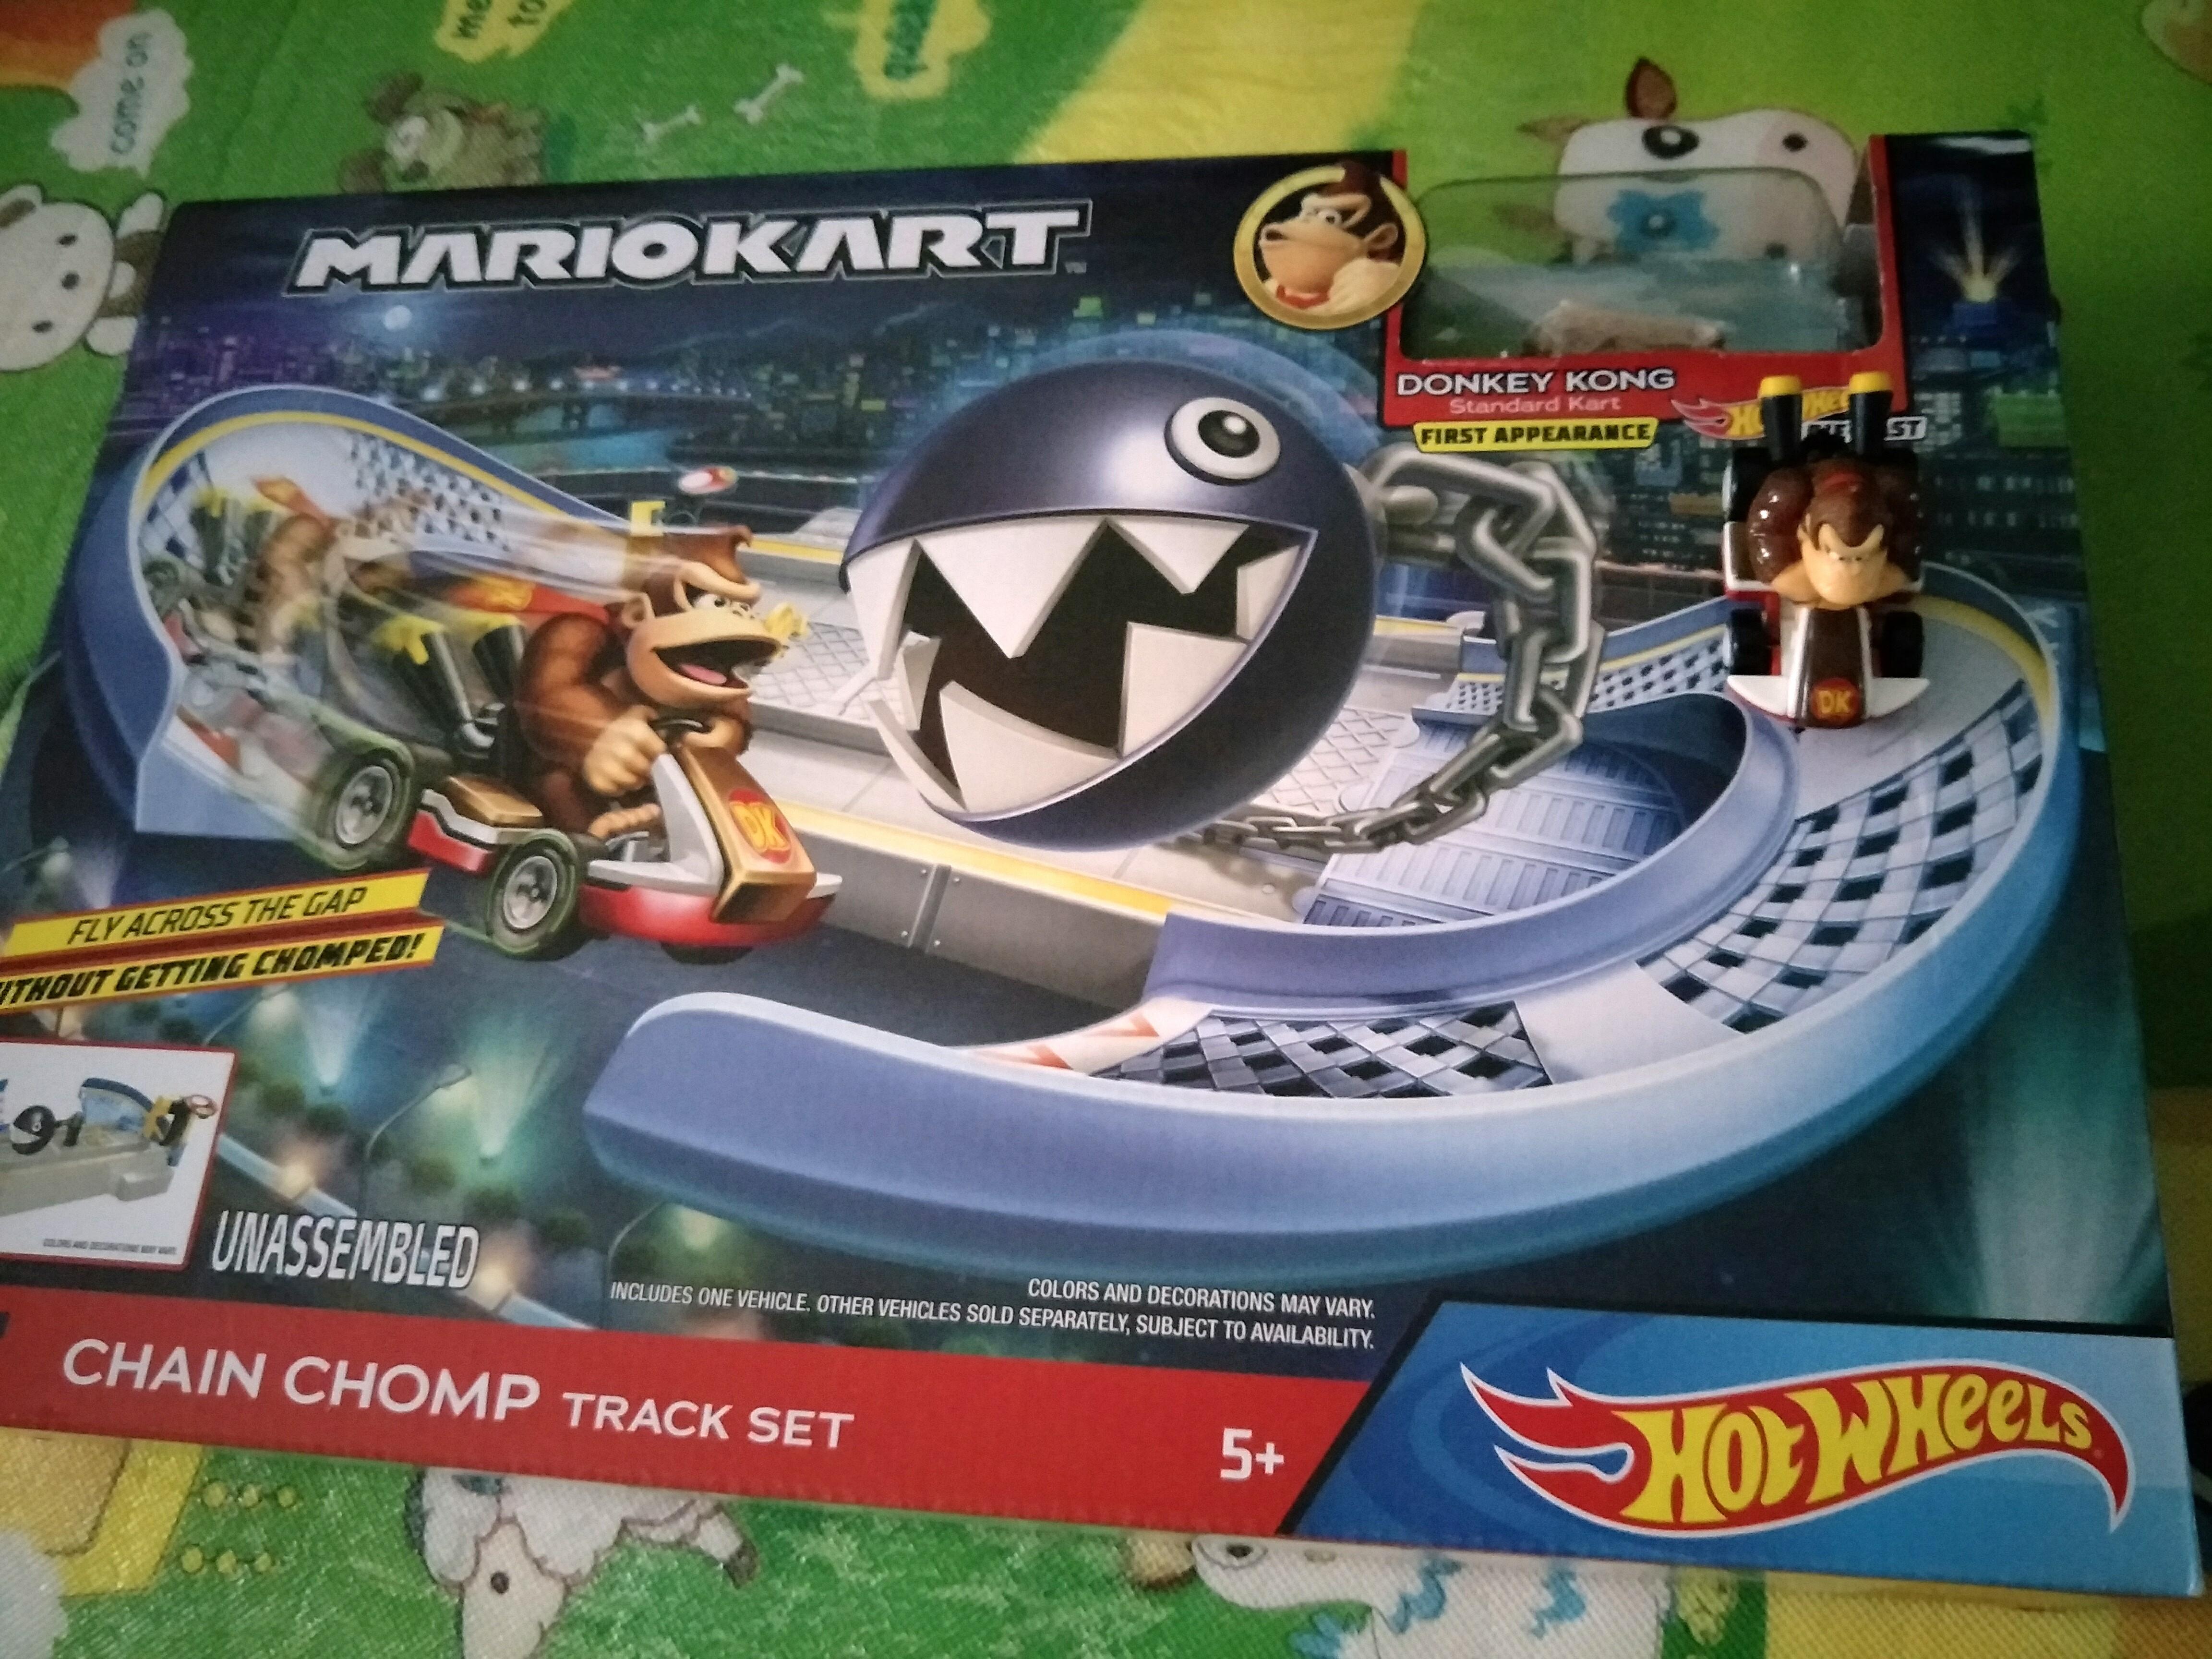 Hot Wheels 2020 Mario Kart Chain Chomp Track Set Donkey Kong First Appearance 8 for sale online 